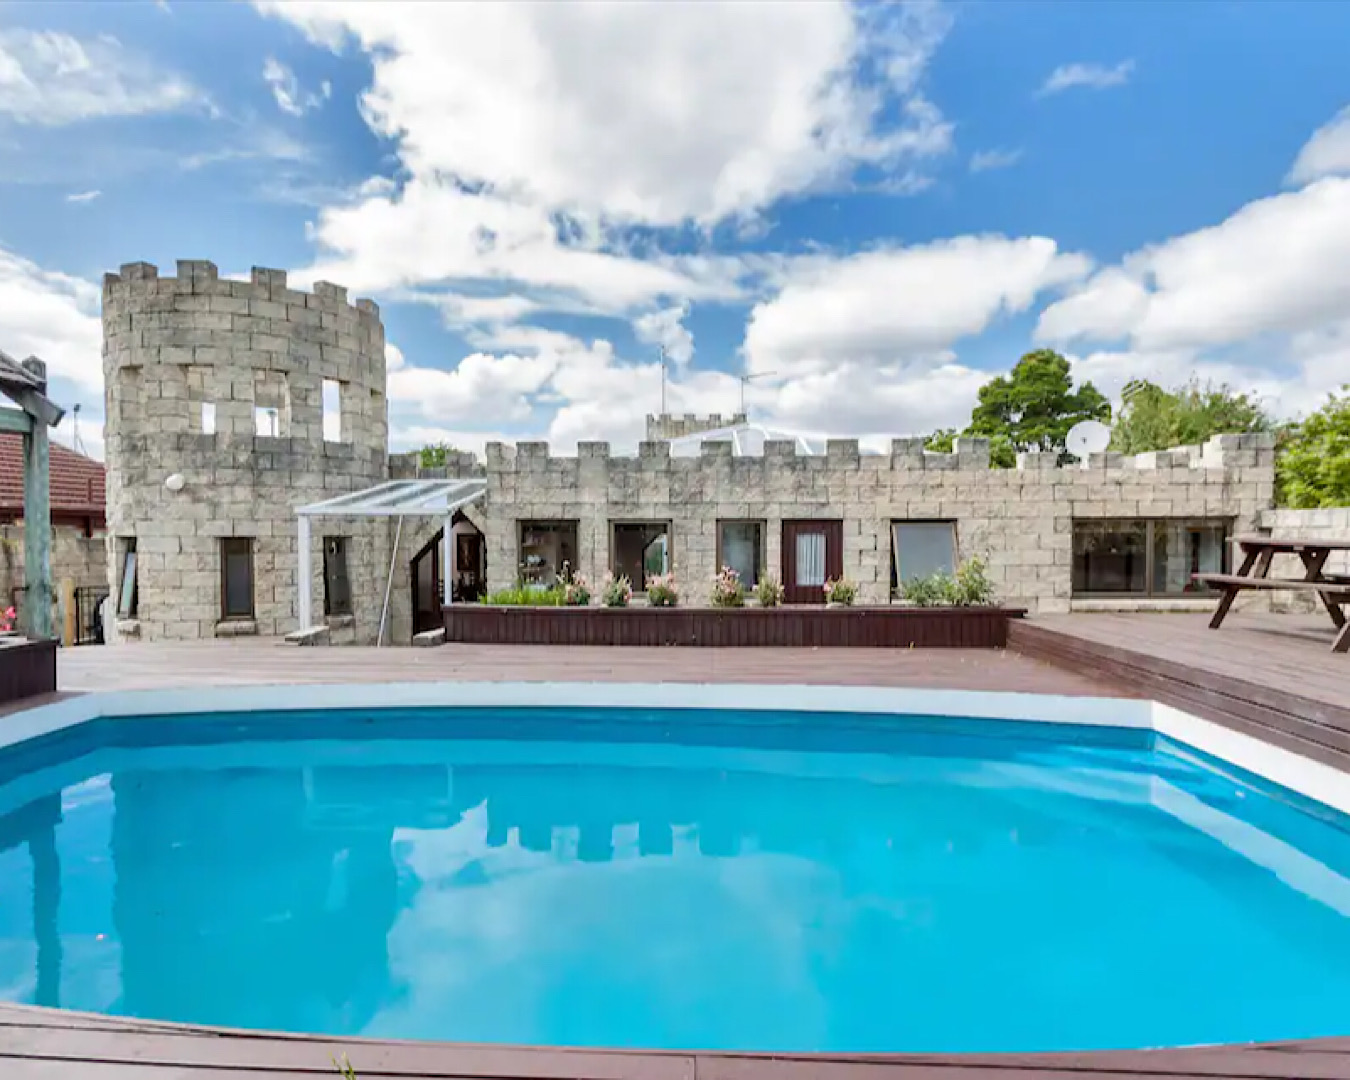 A large blue pool within an airbnb designed as a castle. 